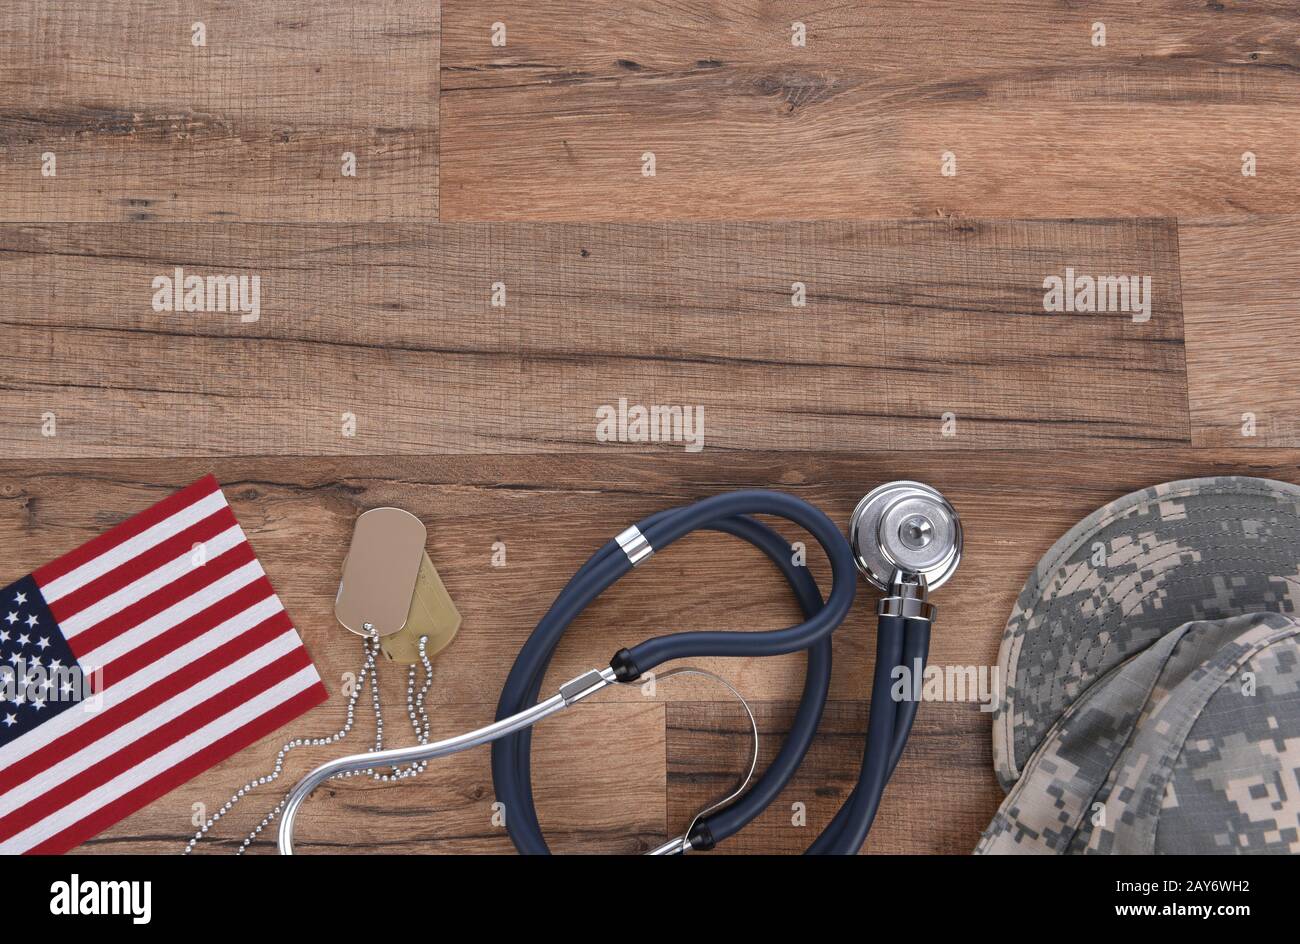 Military Health Care Concept. Camo hat, dog tags, stethoscope, pills, and American Flags on a wood background. Stock Photo